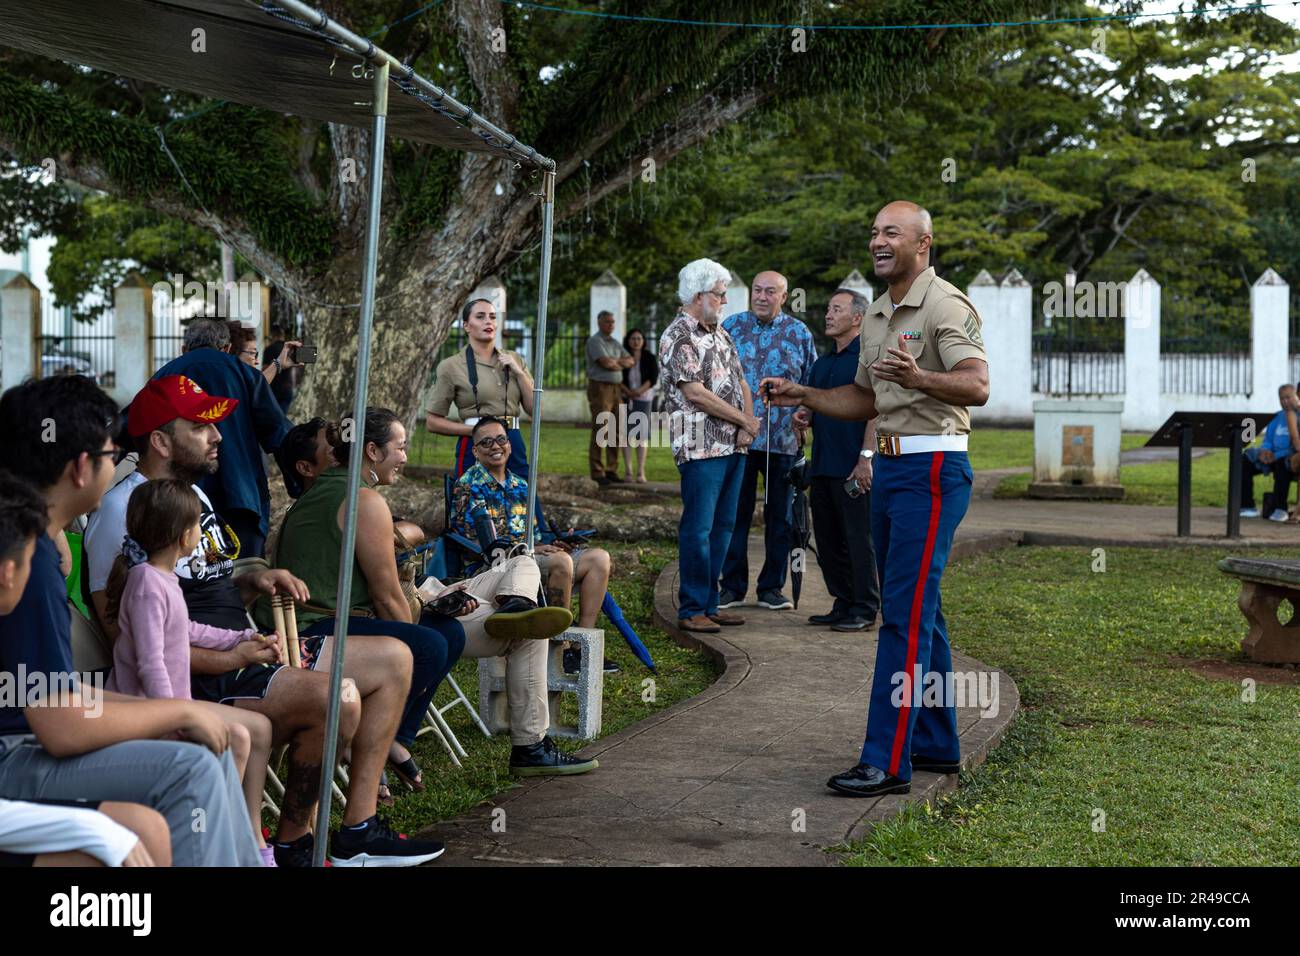 U.S. Marine Corps Staff Sgt. Uiliami Fihaki, an enlisted conductor with Marine Corps Forces Pacific Band, interacts with attendees during a live concert for the local community at Plaza de Espana, Hagatna, Guam, Jan. 23, 2023. The MARFORPAC Band participated in multiple community engagements during their visit to Guam as part of the Naval Support Activity, Marine Corps Base Camp Blaz Reactivation and Naming Ceremony. In order to encourage music education and showcase the vibrant history and tradition of military music, the band is active in providing clinics and concerts for the communities th Stock Photo